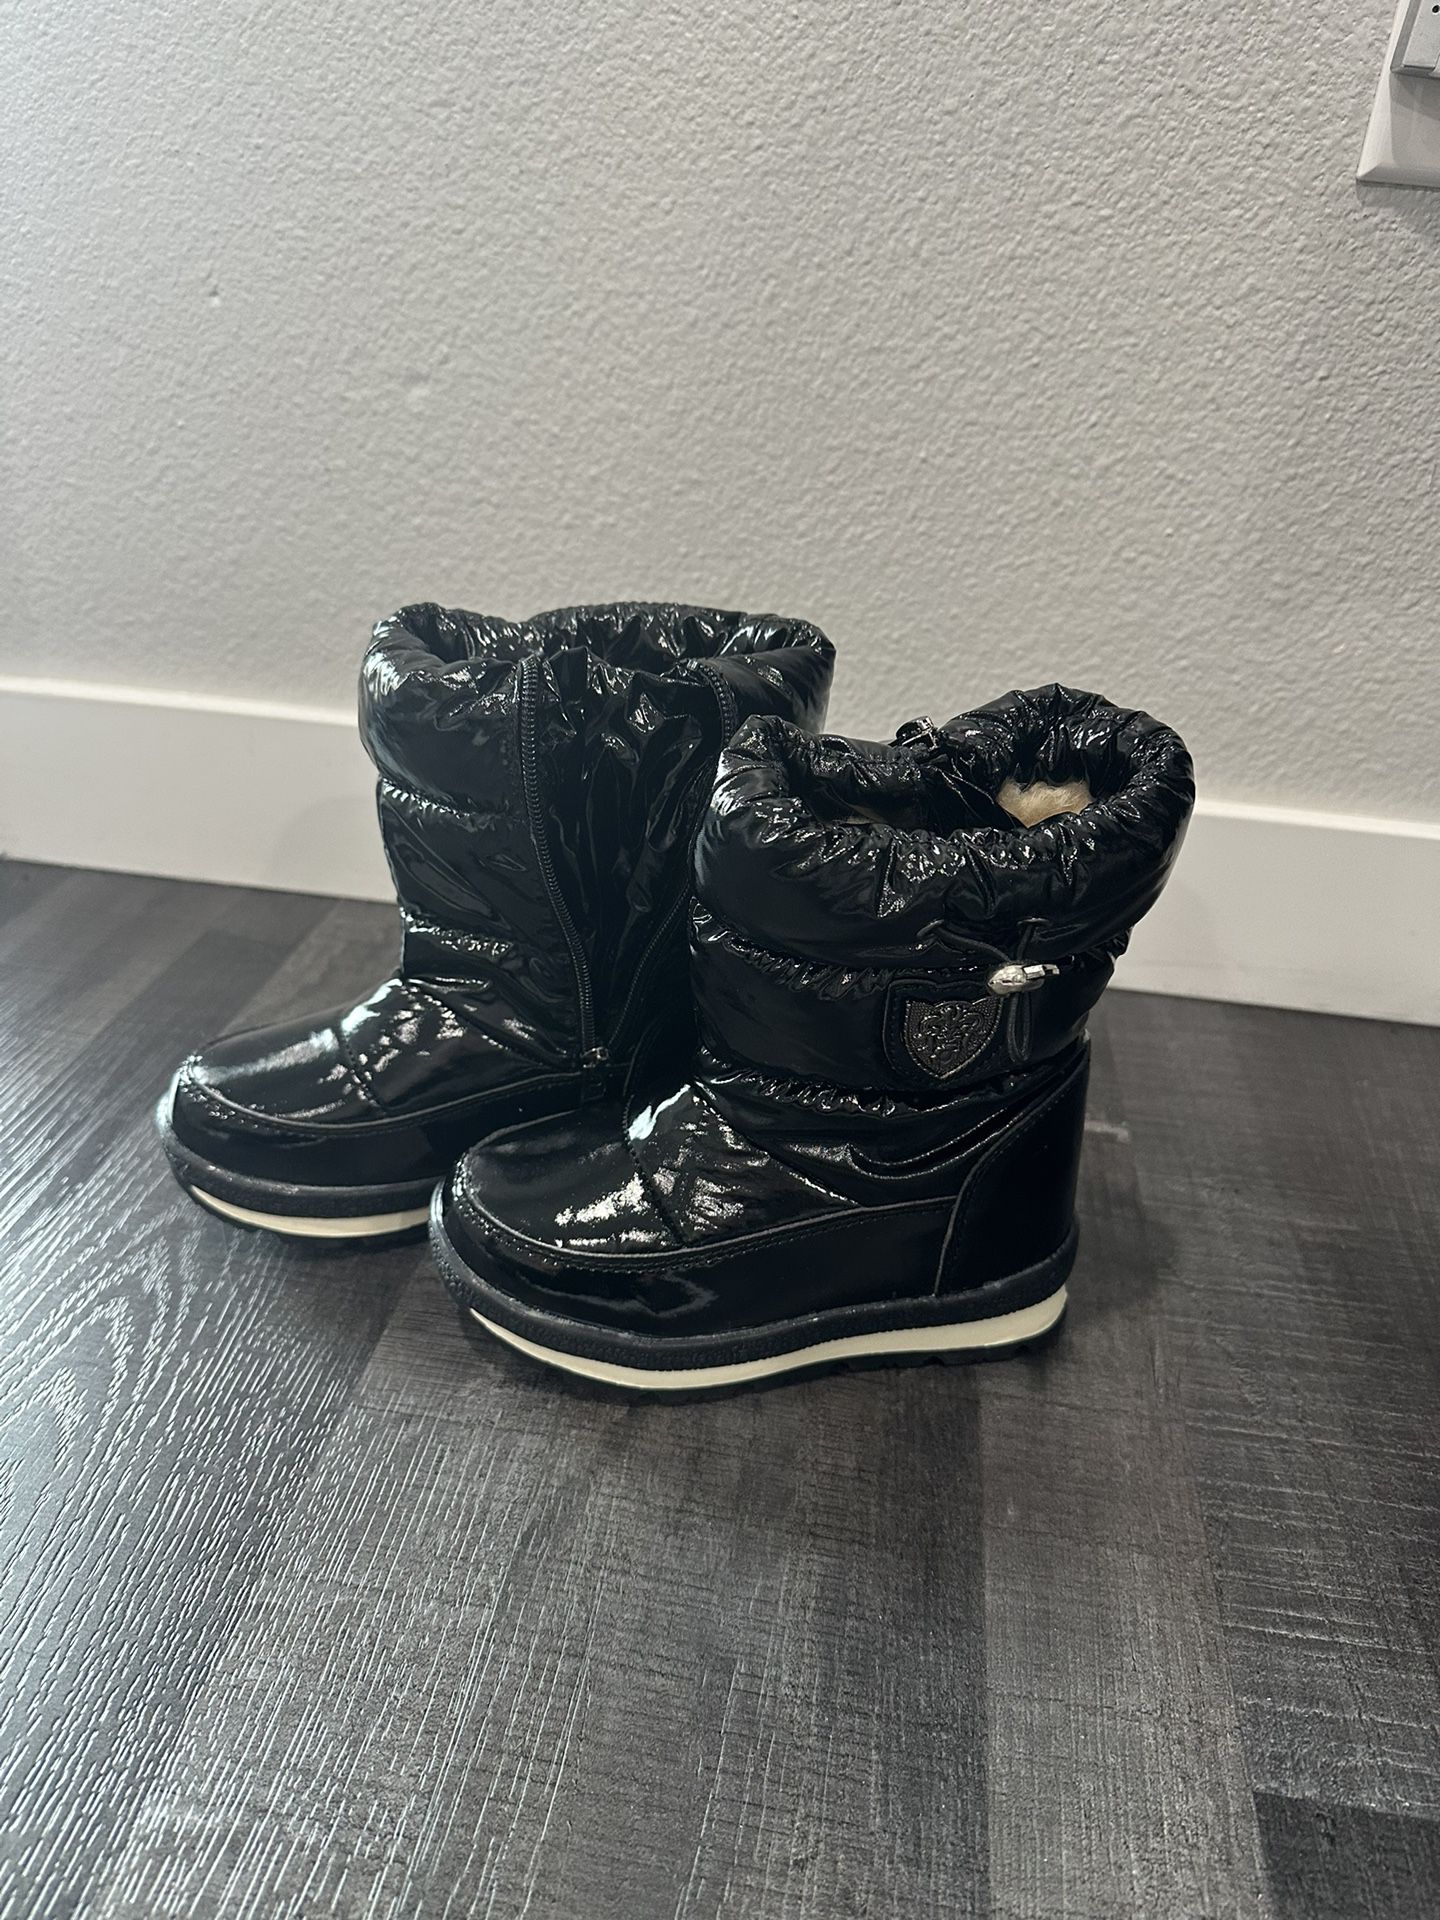 Kids Winter Snow Boots Size 29(running Small 11-11.5 US)